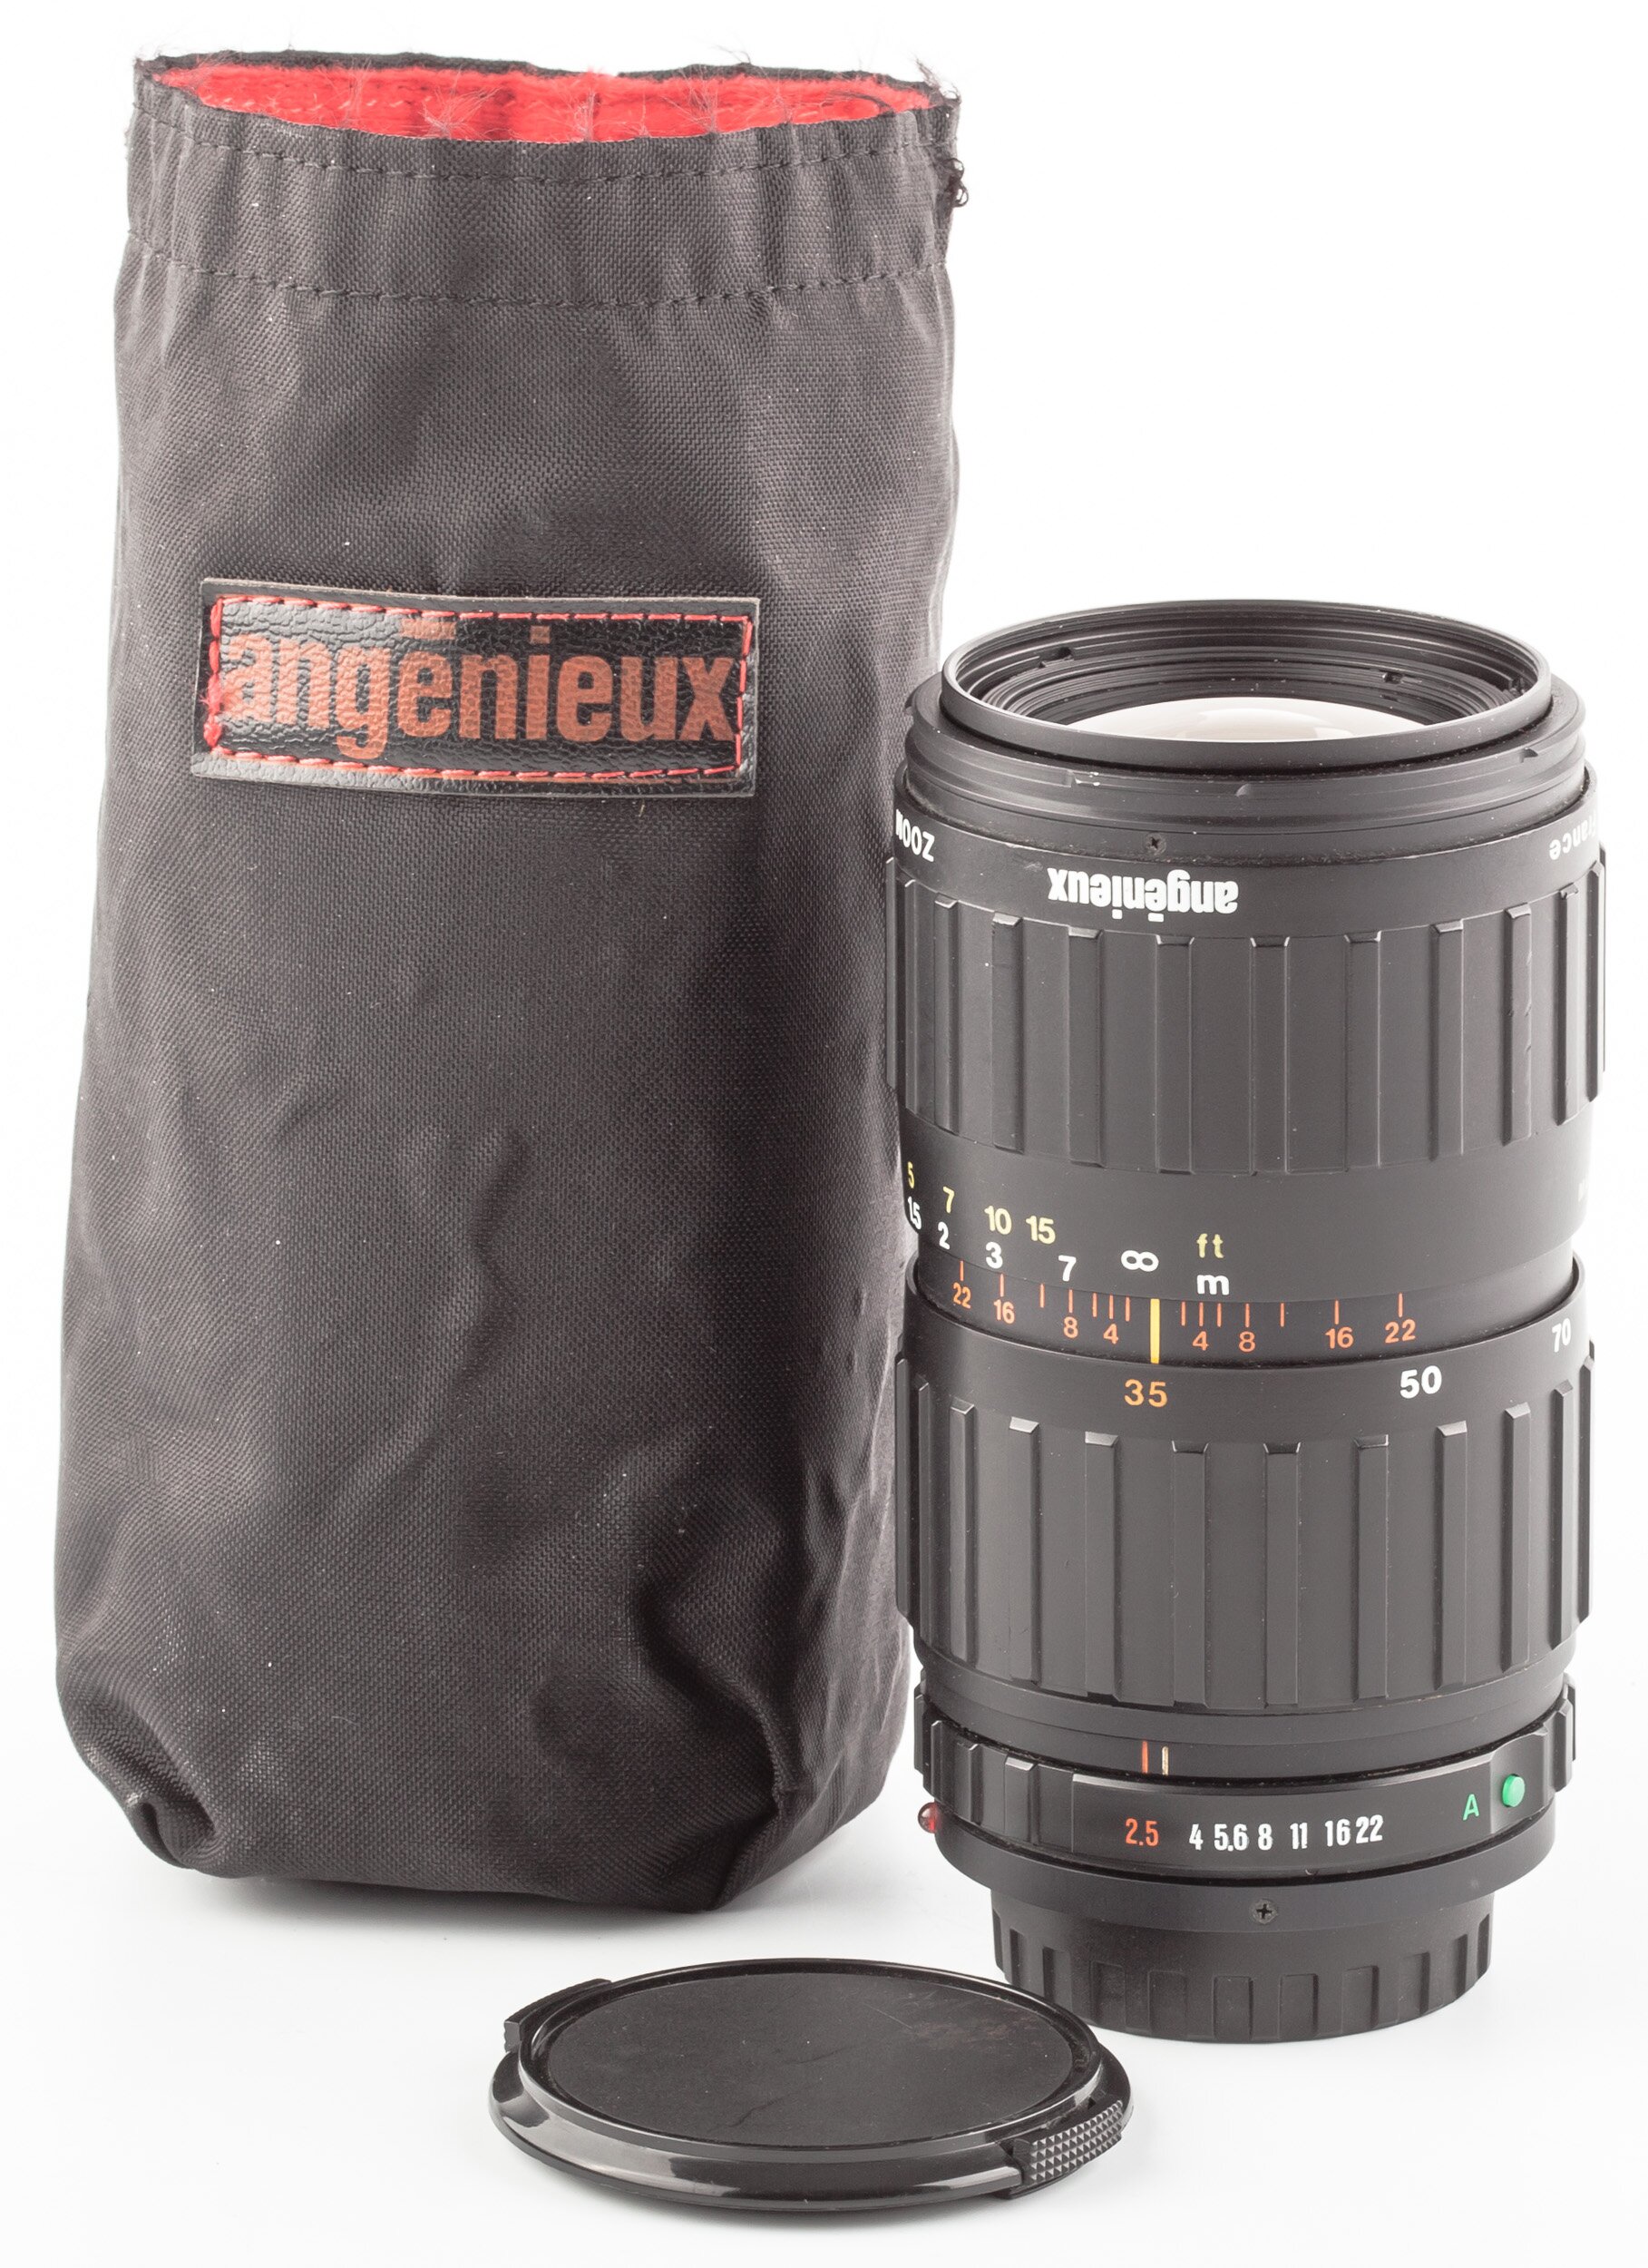 Angenieux Zoom 35-70mm 2,5-3,3  2x35 Canon FD